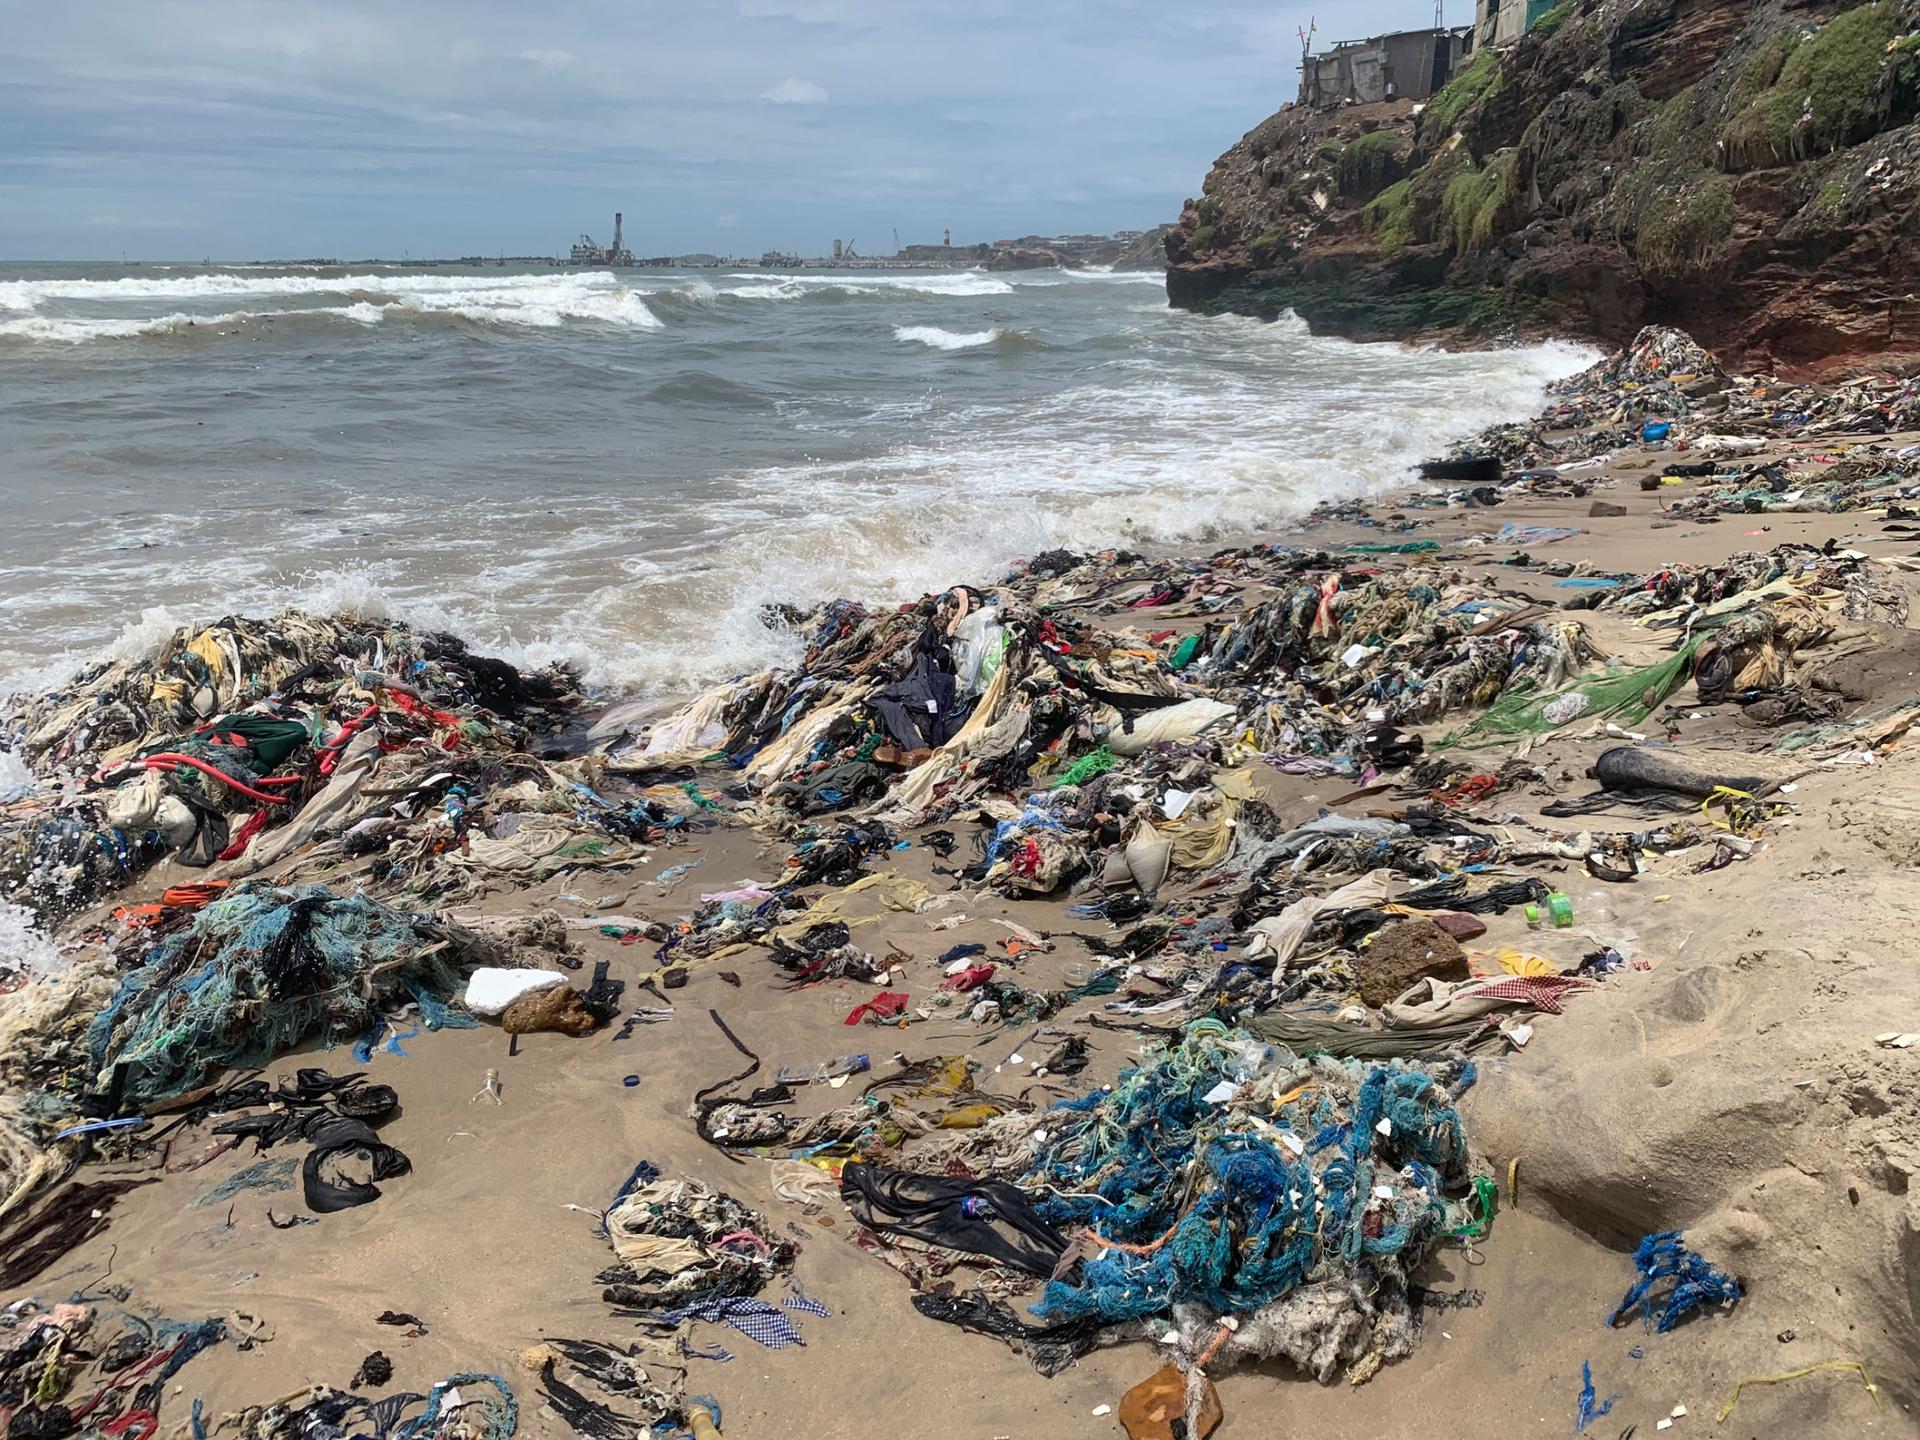 Clothing waste pollutes Ghana's coastline, hurting over 2 million people who depend on fishing livelihoods.